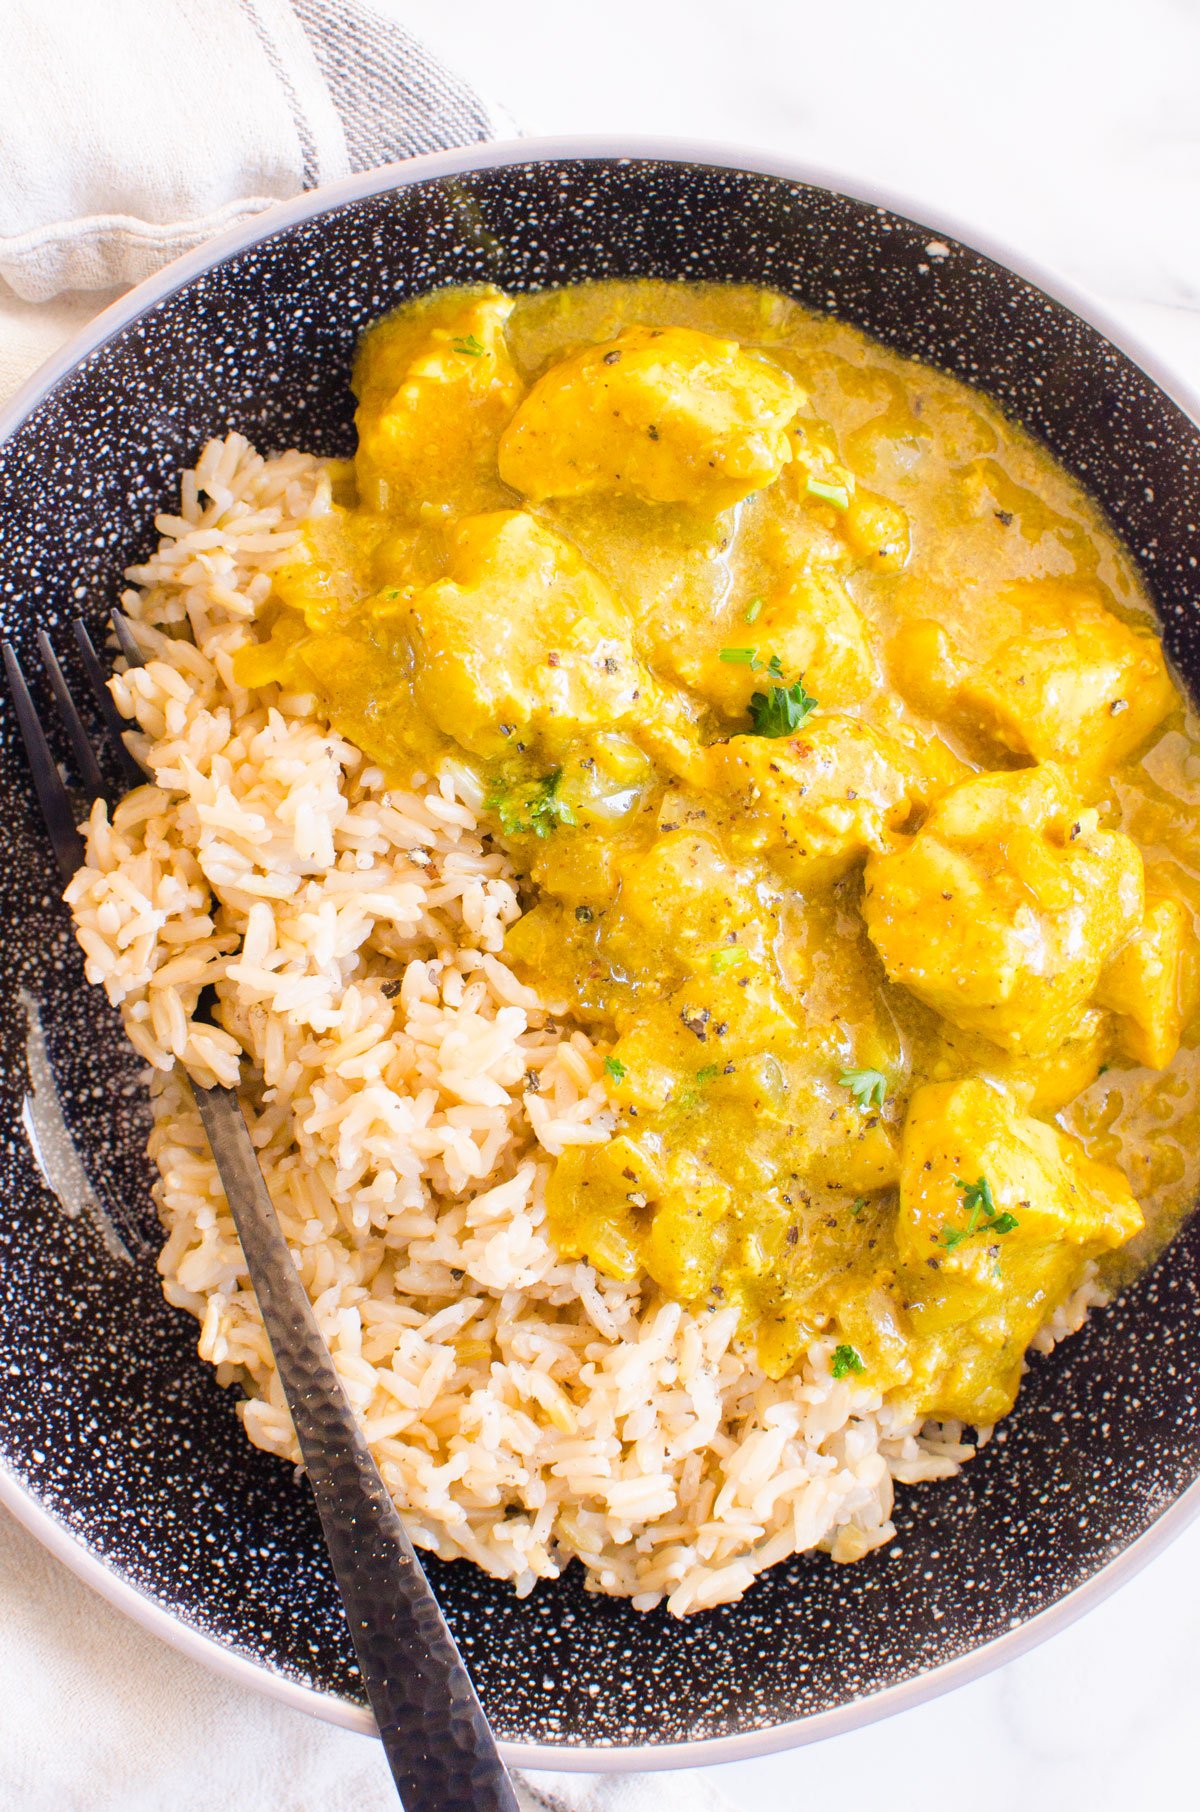 Yellow curry chicken recipe served with rice in a bowl with fork.